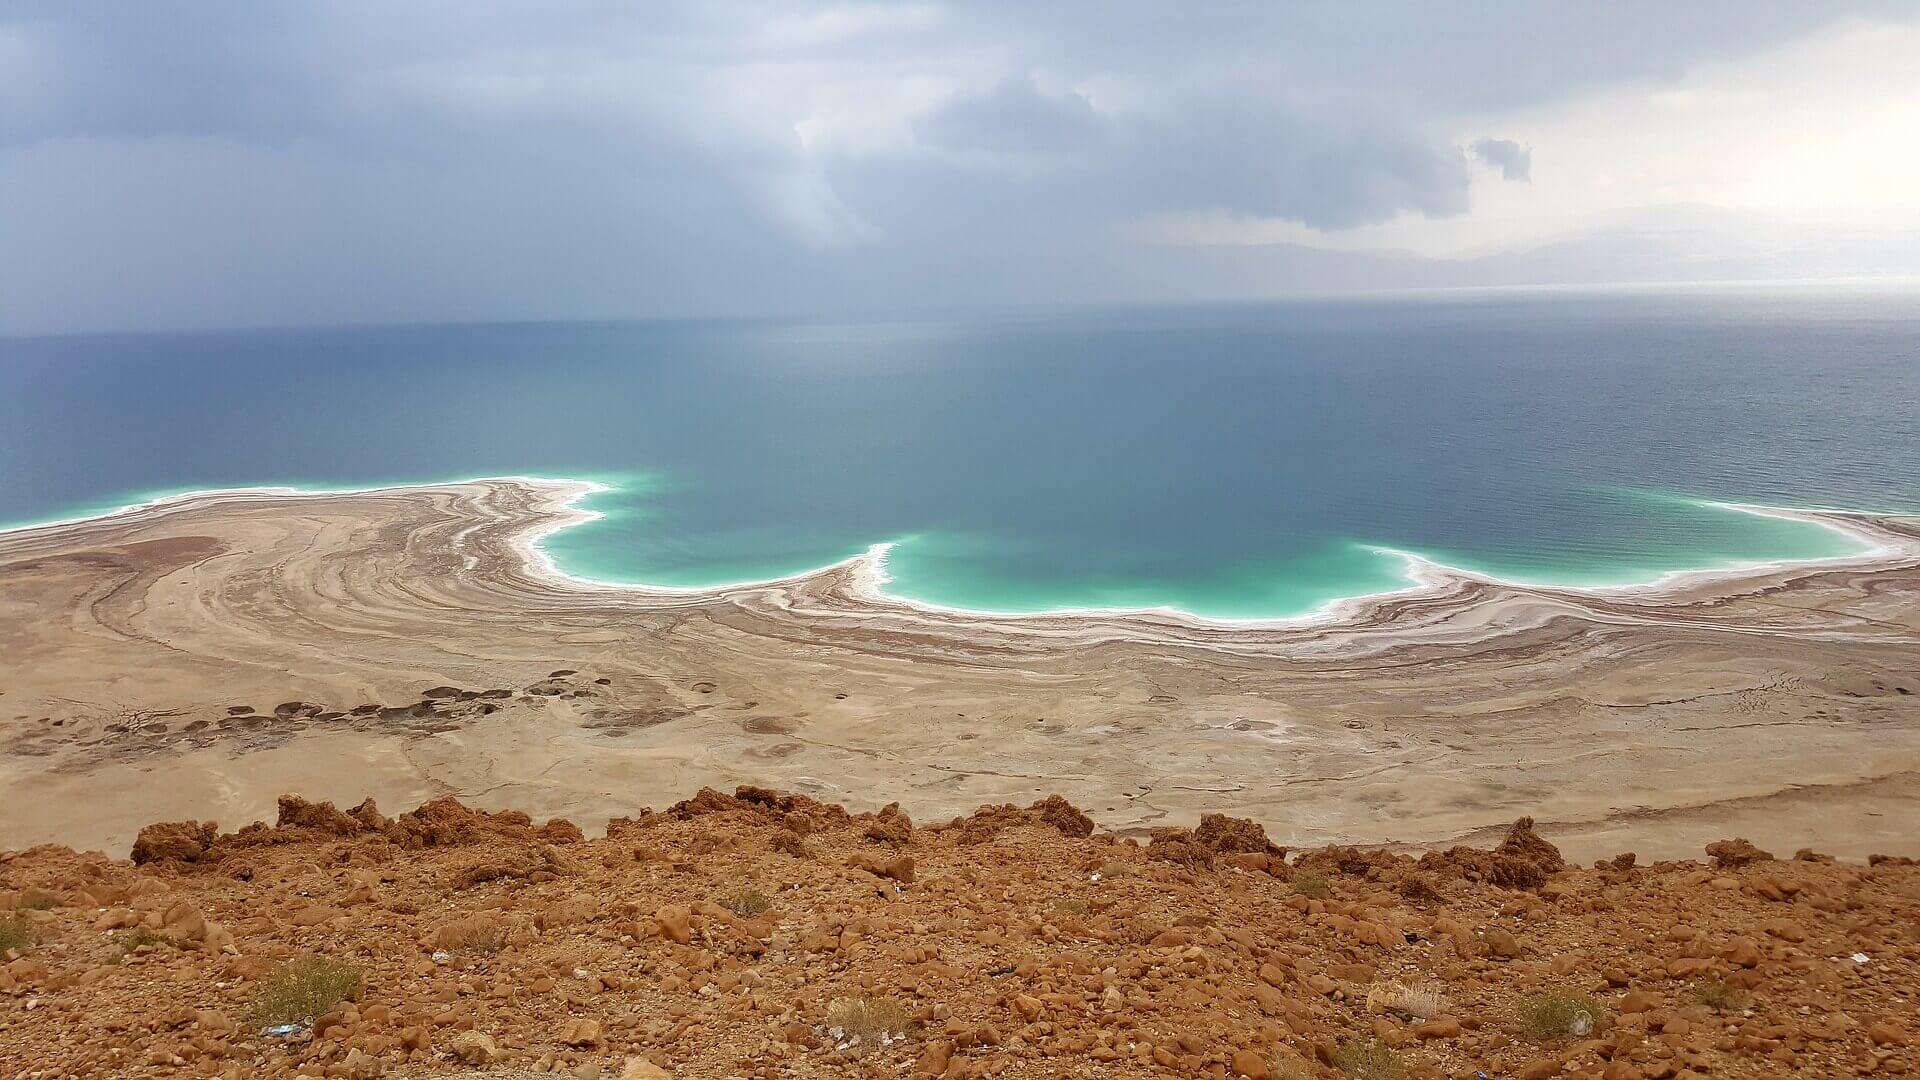 Ein Gedi is right by the dead sea and a great location for stargazing